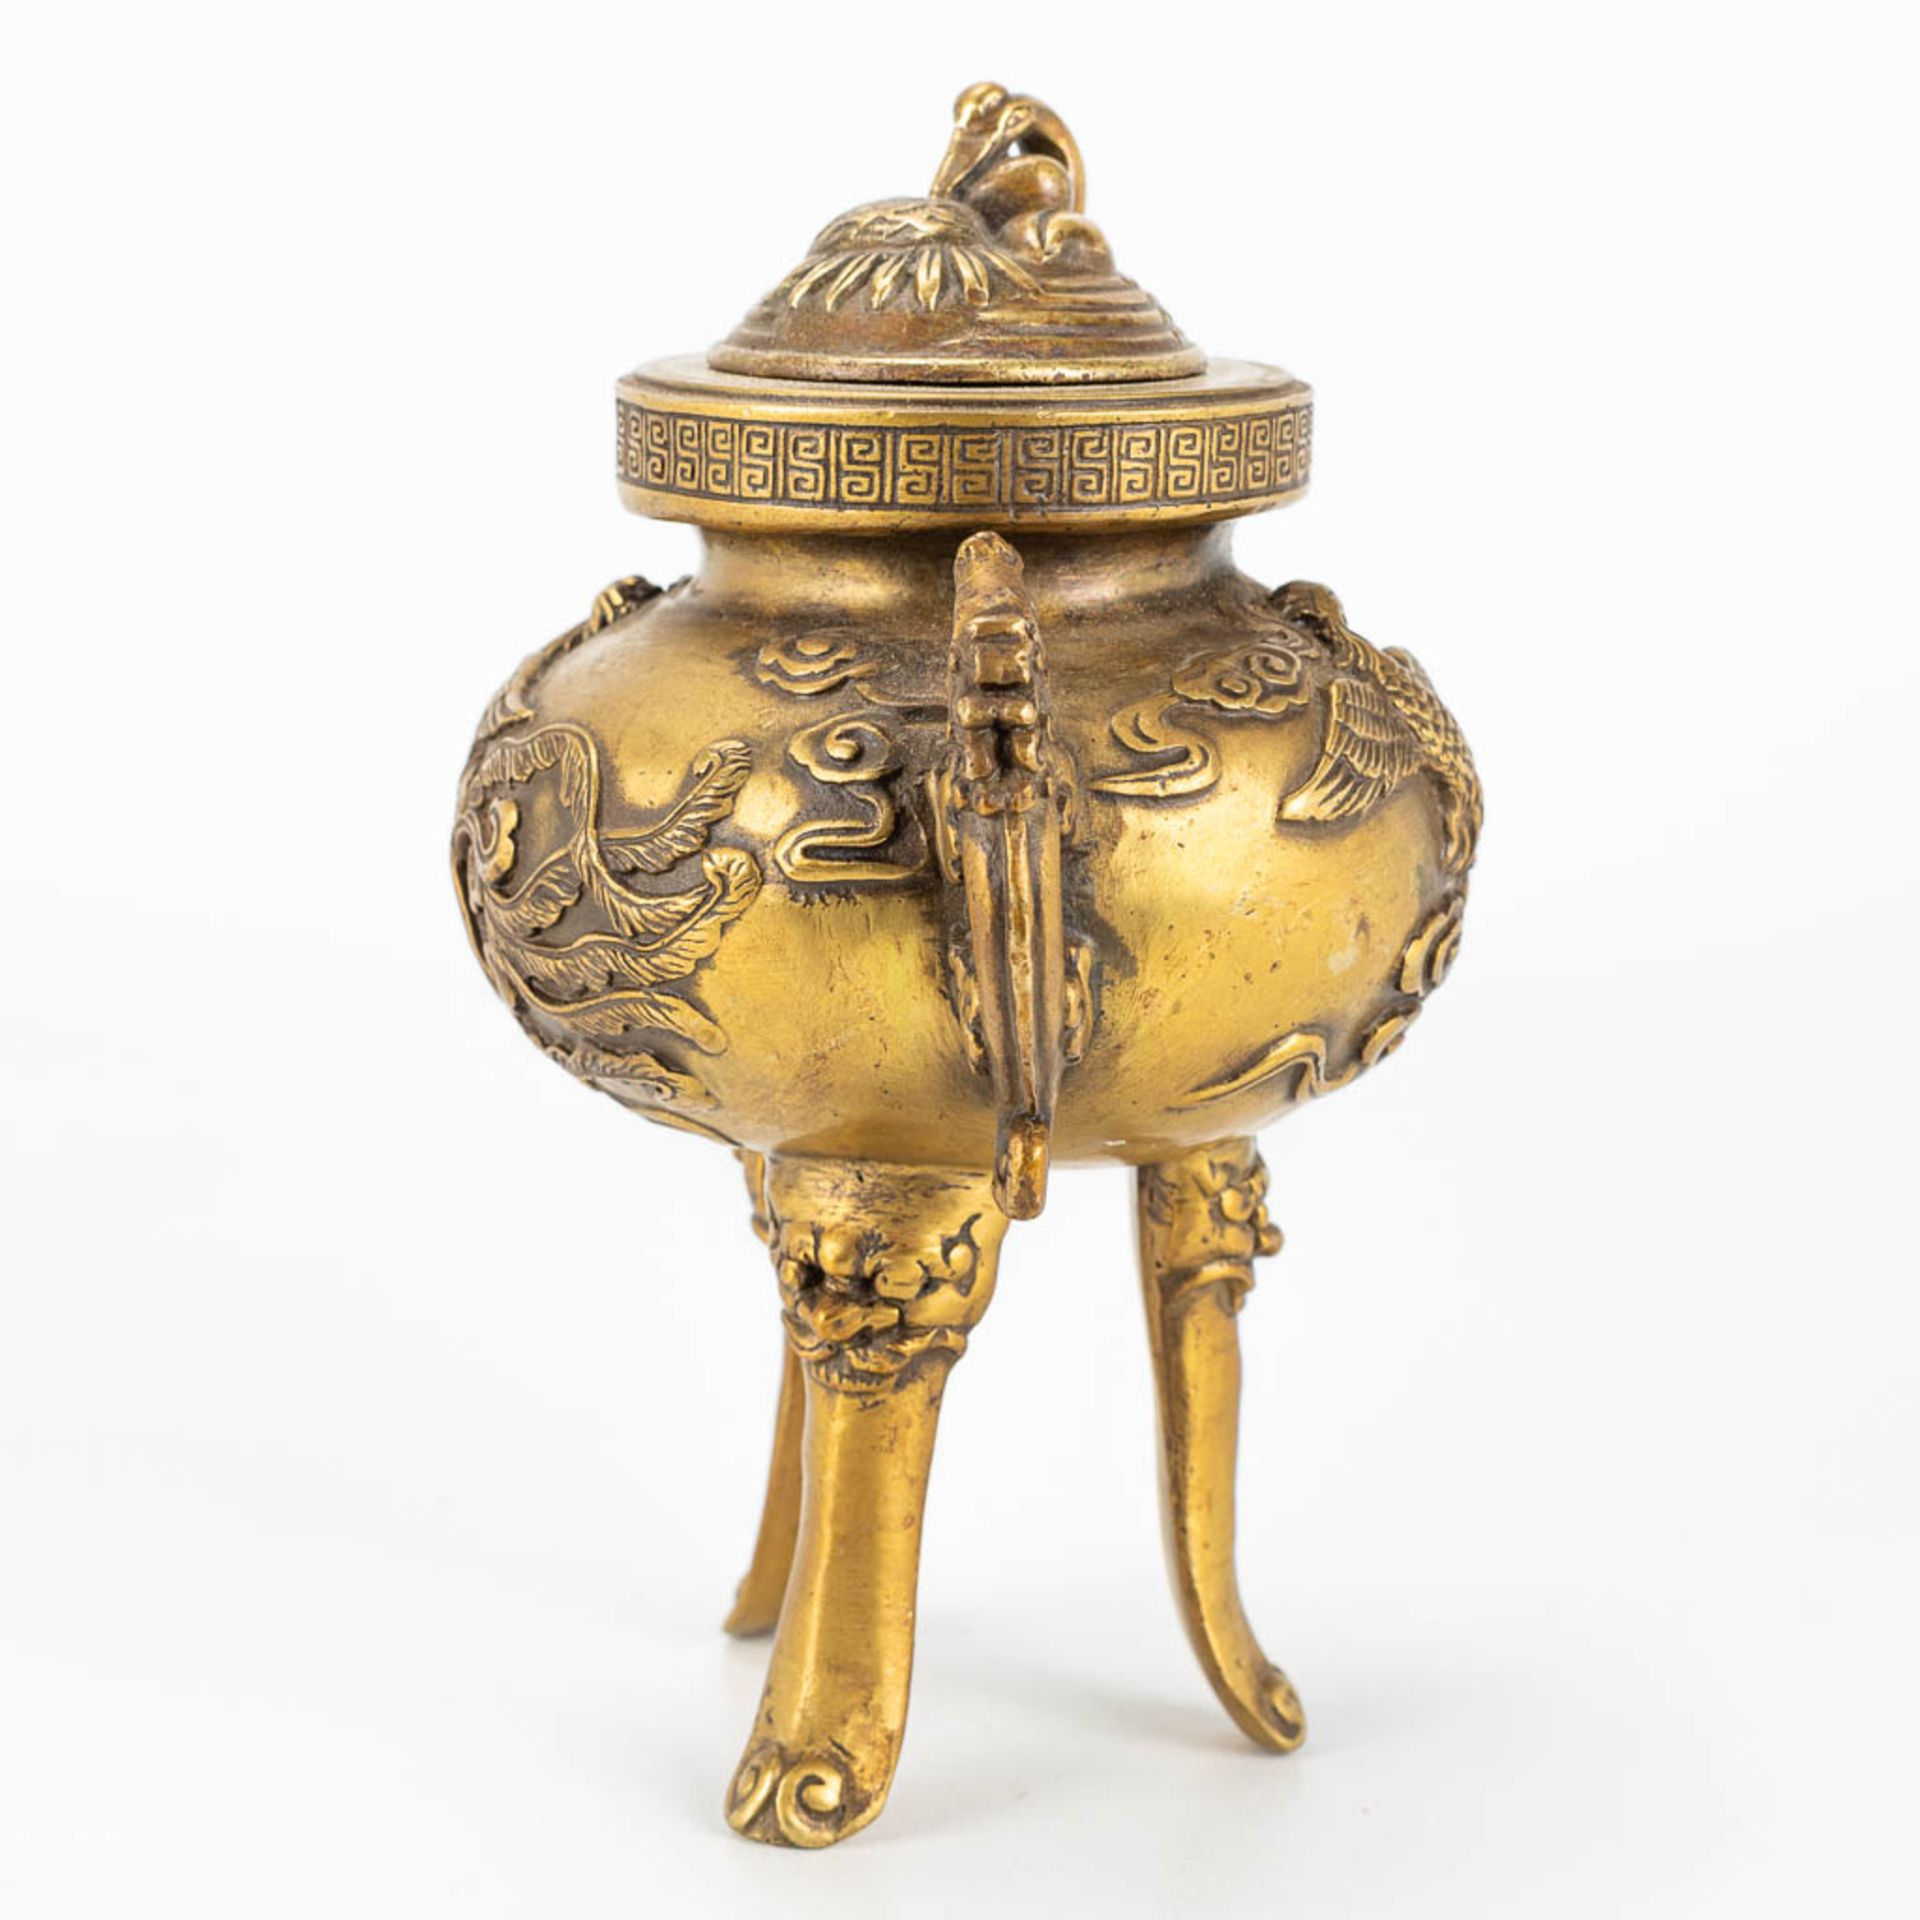 A bronze Koro Brule Parfum, decorated with dragons. - Image 2 of 12